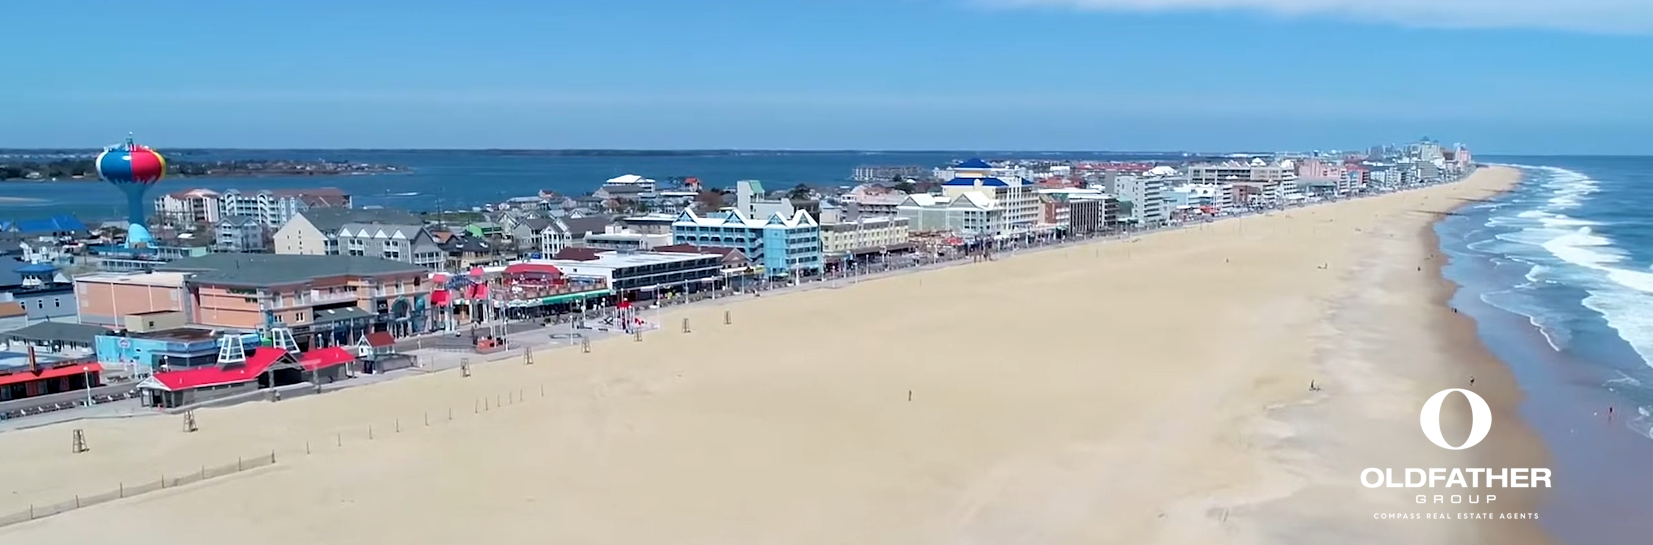 listing agent ocean city md - photo of ocean city beaches